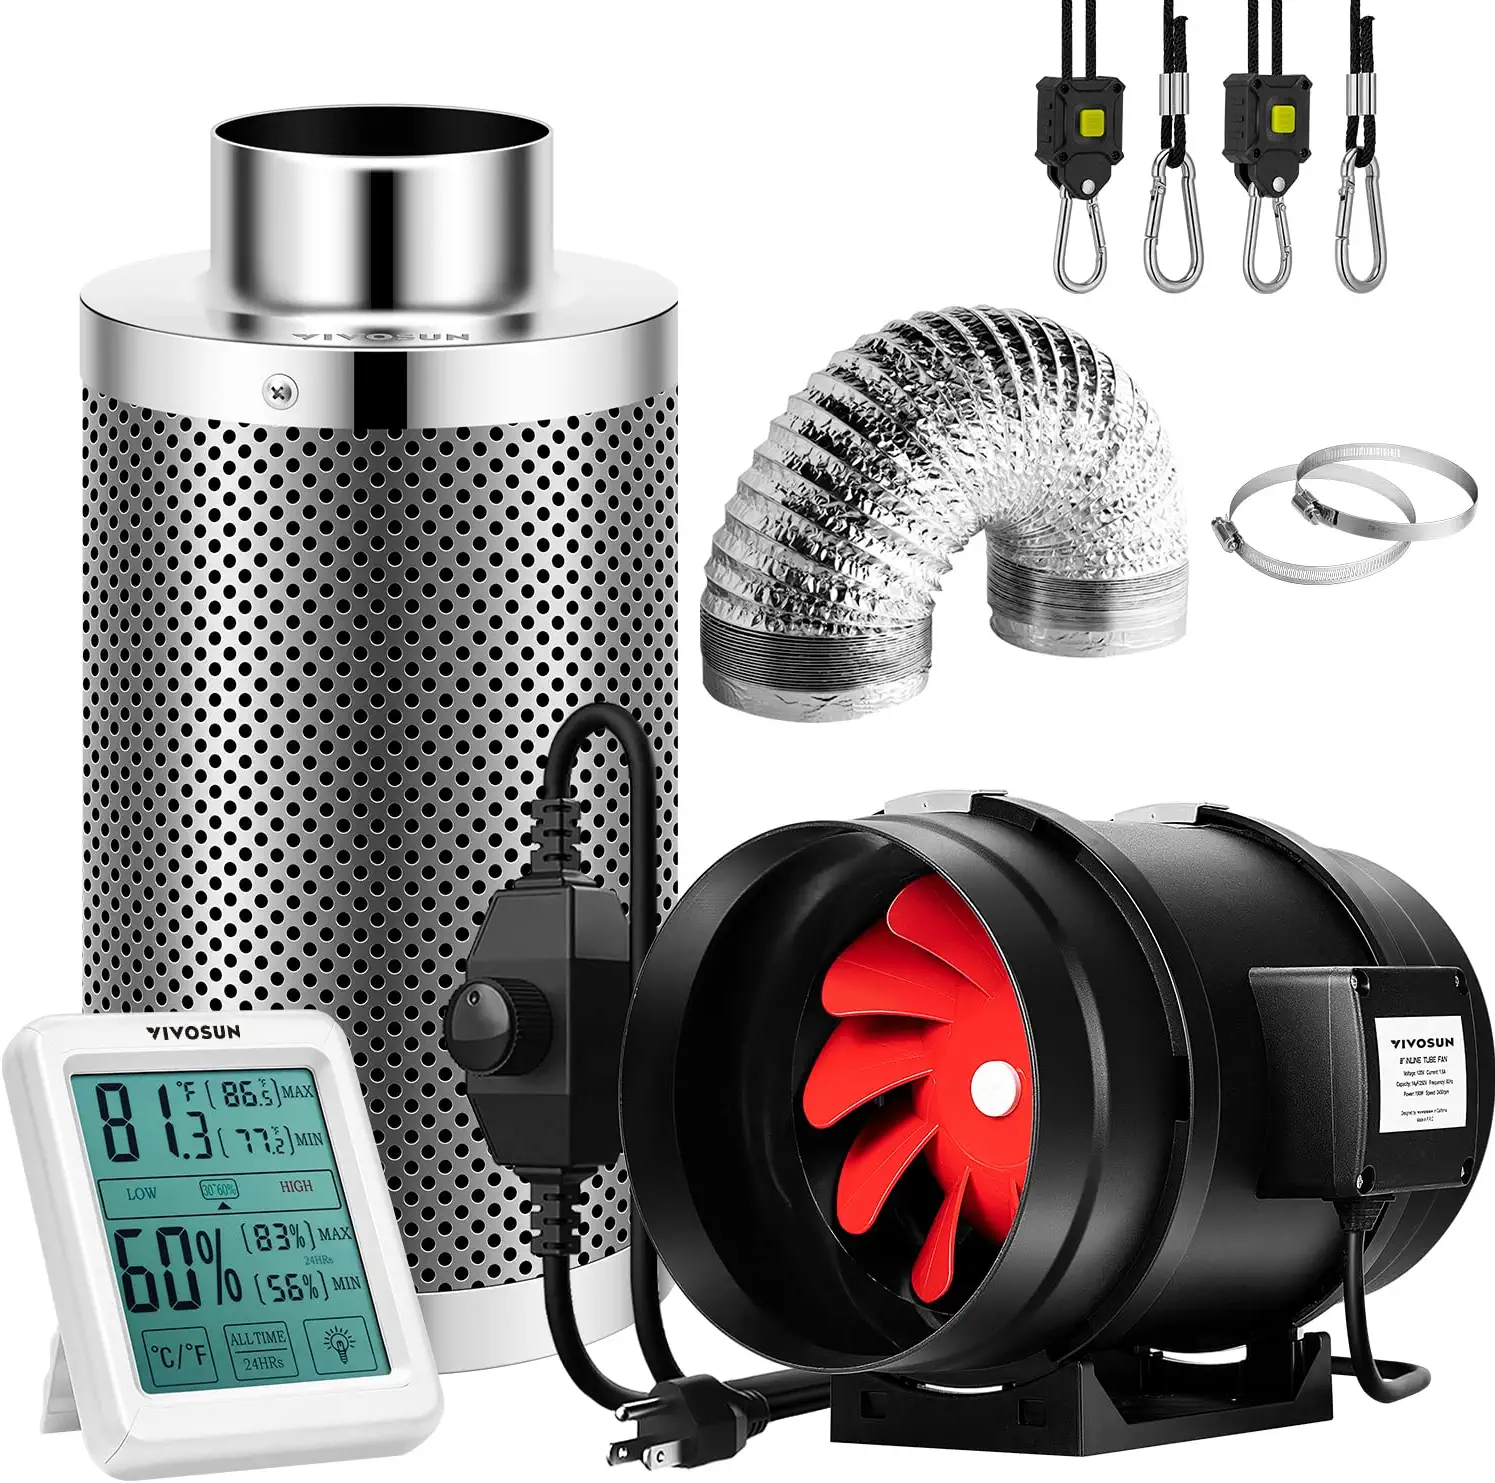 VIVOSUN 8-Inch 720 CFM Inline Duct Fan Kit with Carbon Filter, Thermometer, and Ducting